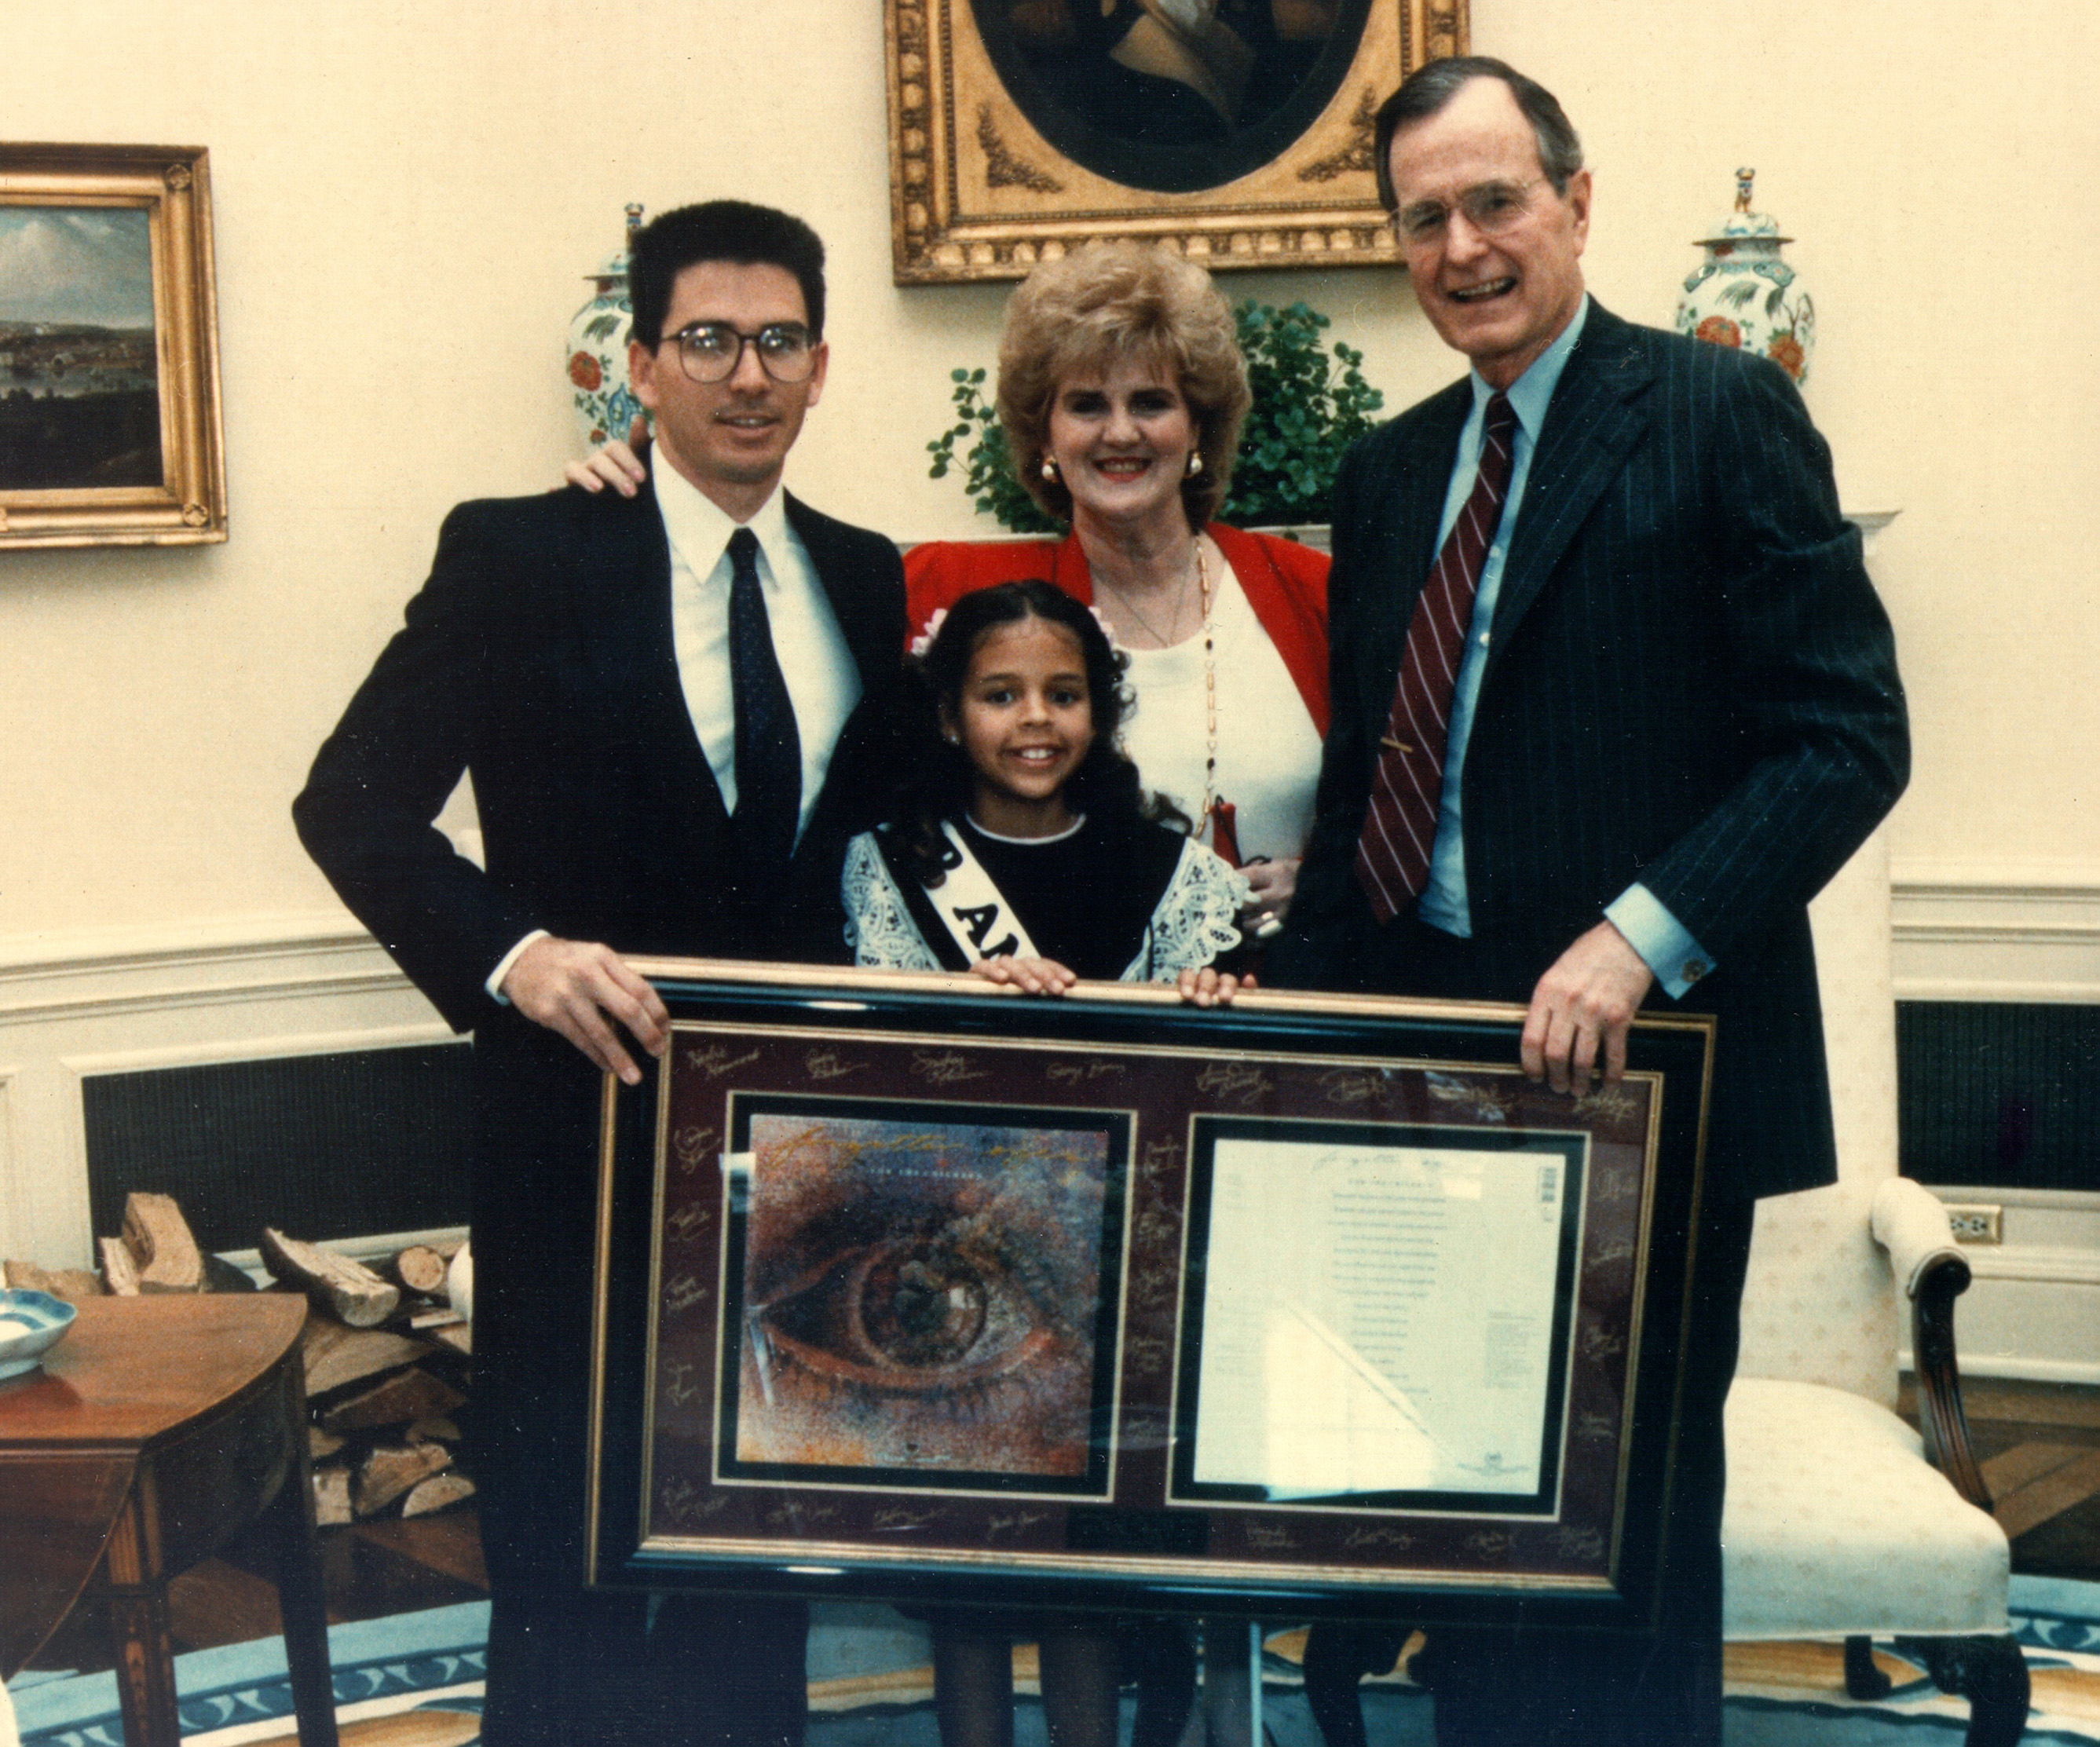 President Bush Oval Office meeting with RPI Founder Helen Harris Son Richard and Poster Child Michelle Burke